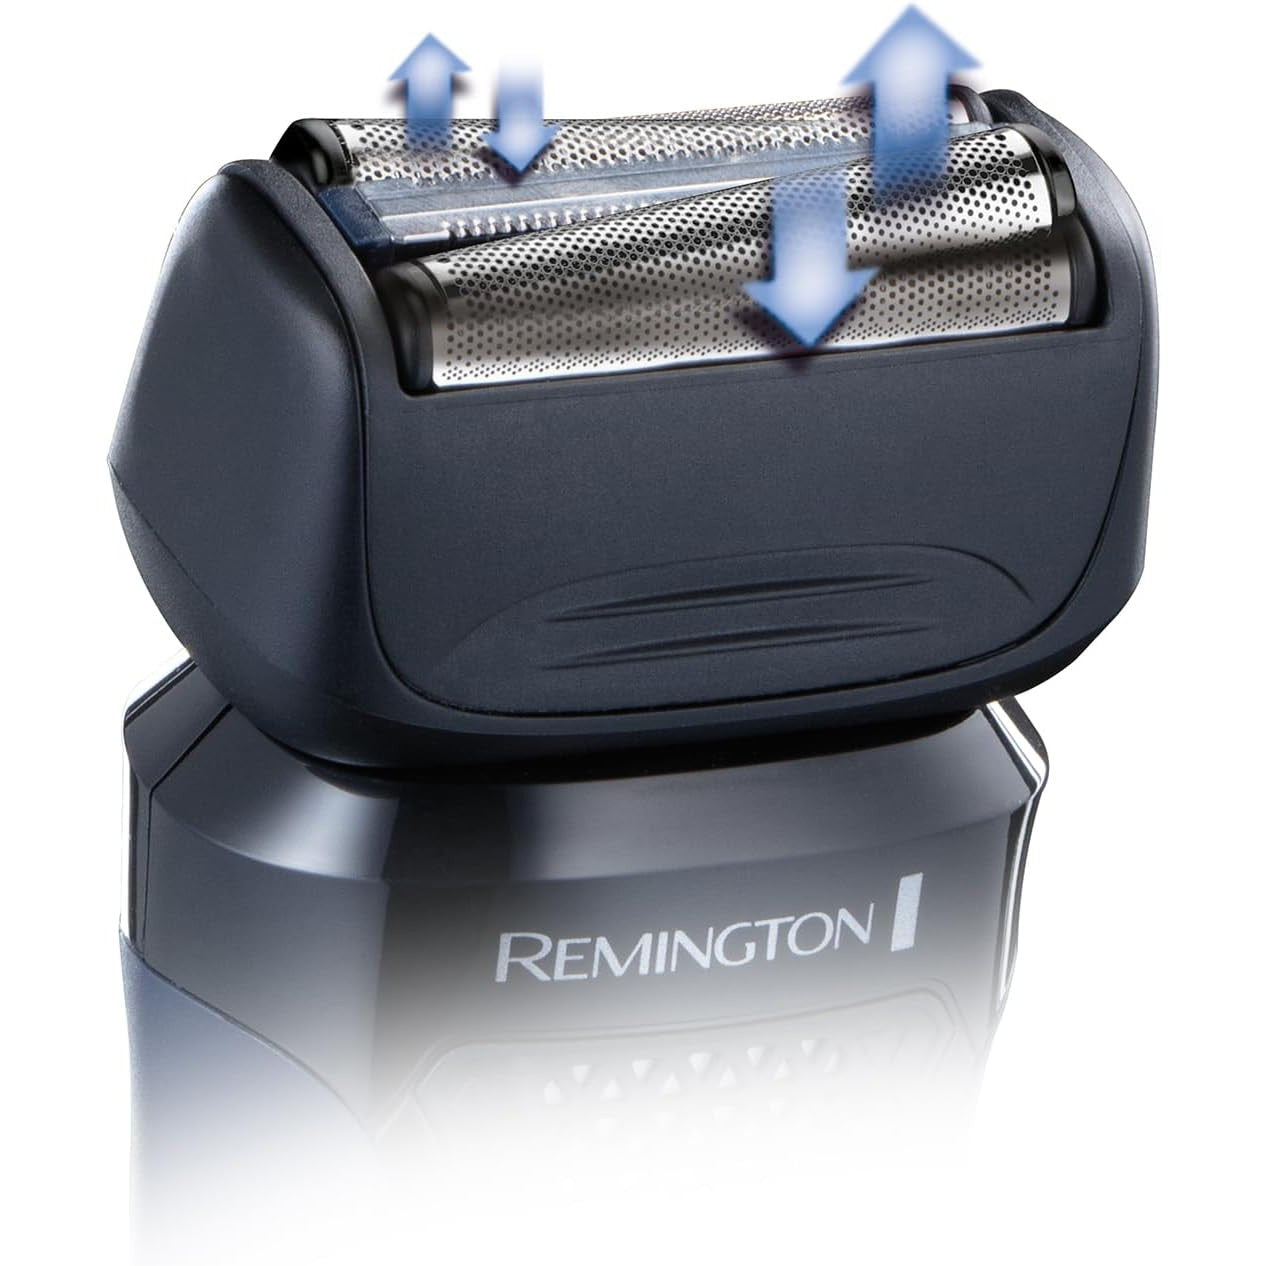 Remington F4 Mens Electric Foil Shaver (Dry Shave, Pop up detail trimmer, 50min usage, 4hr charge, Cordless, Worldwide voltage adjustment, Head guard, Cleaning brush) F4002